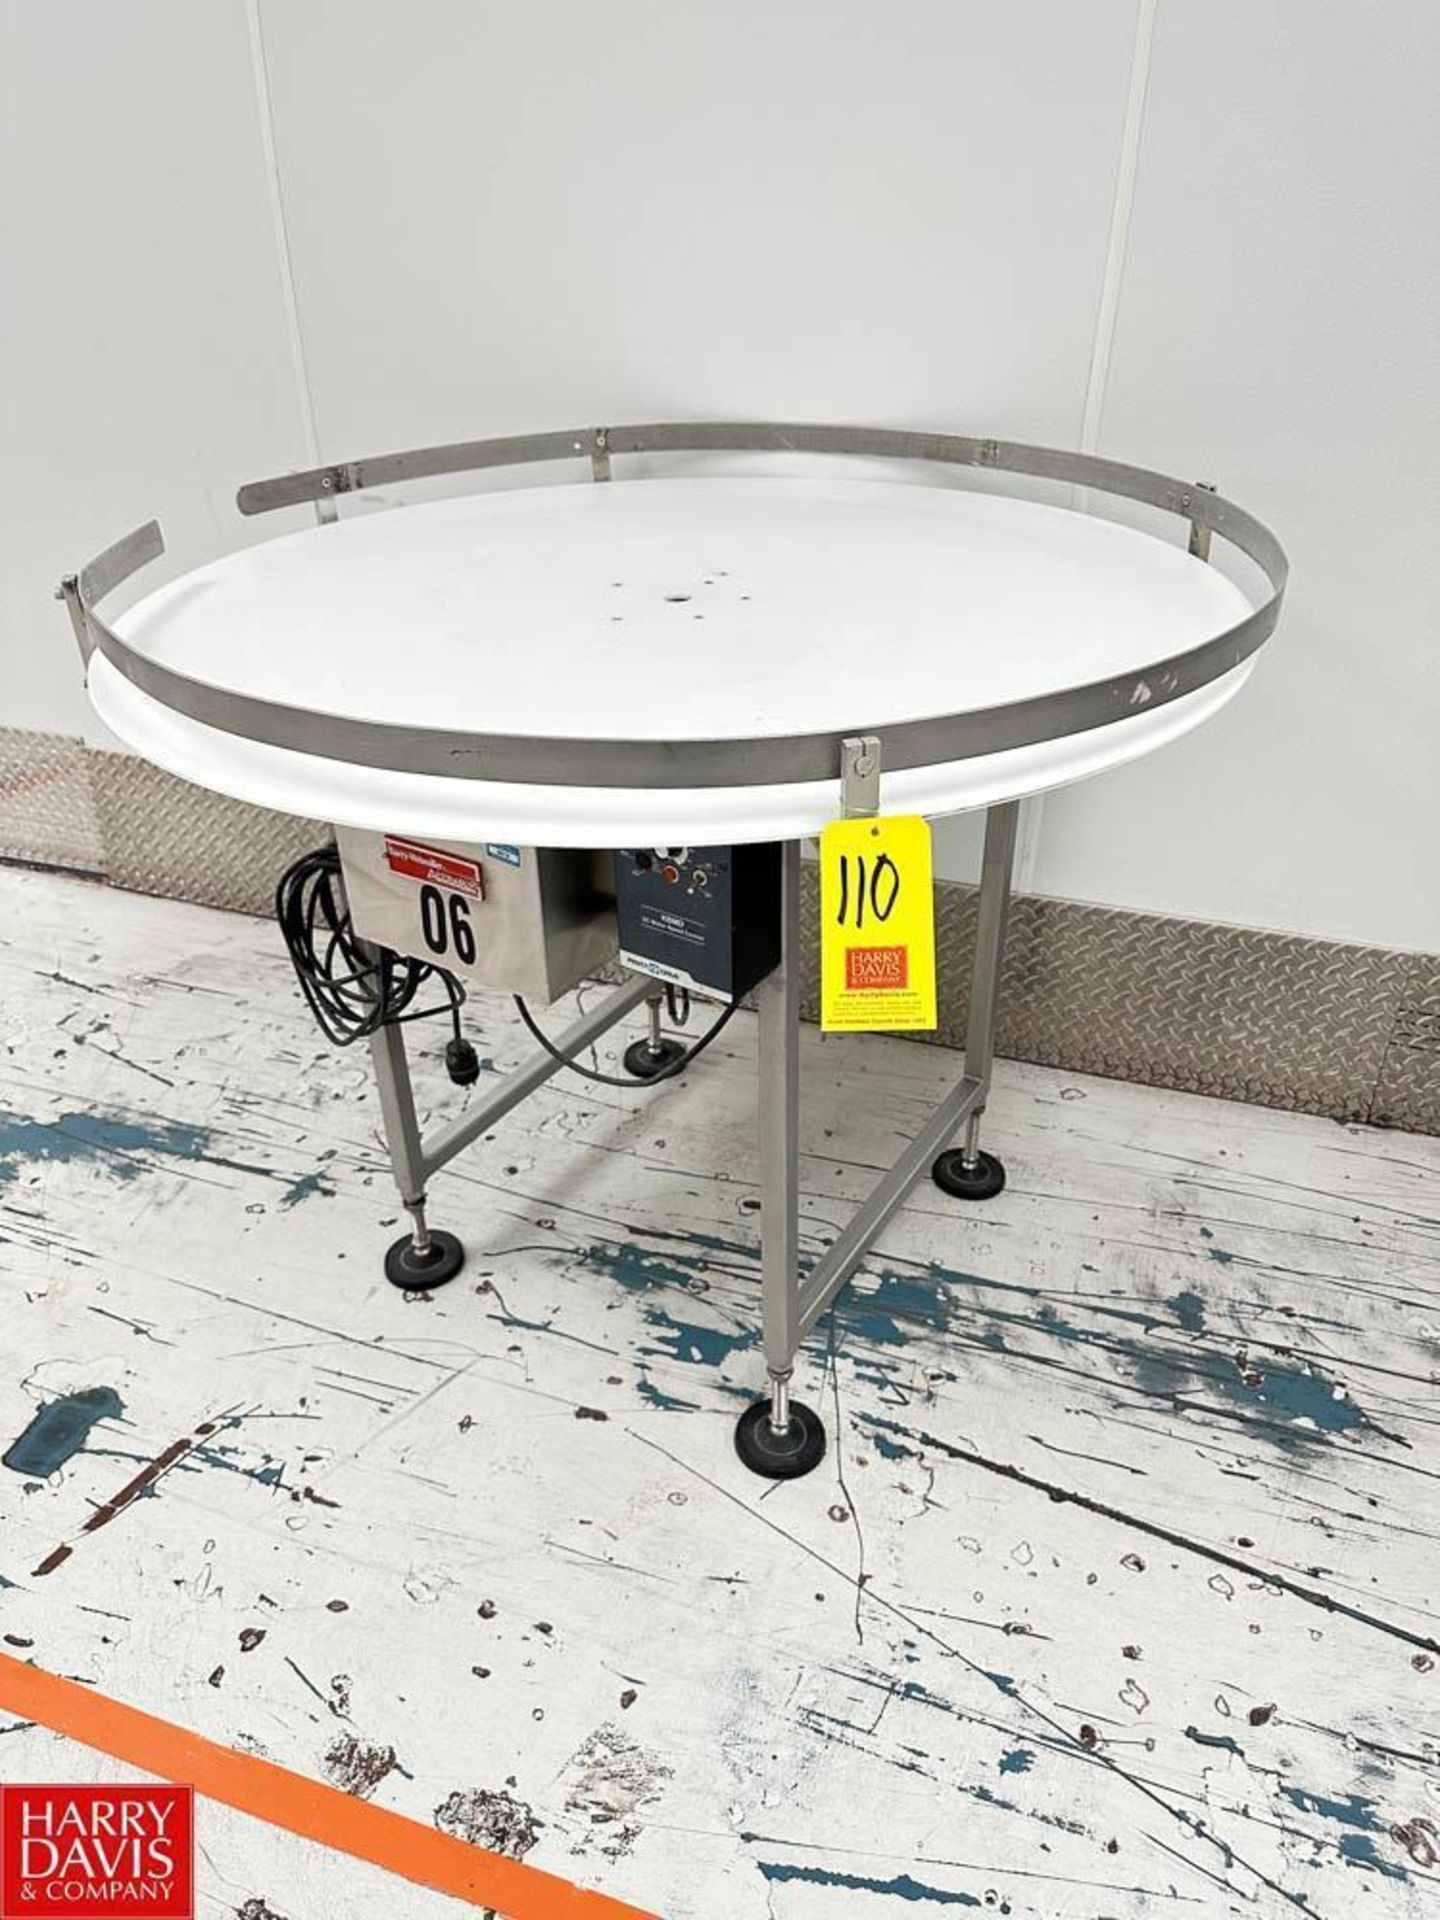 S/S Frame Rotary Accumulation Table, Dimensions = 48" Diameter - Rigging Fee: $75